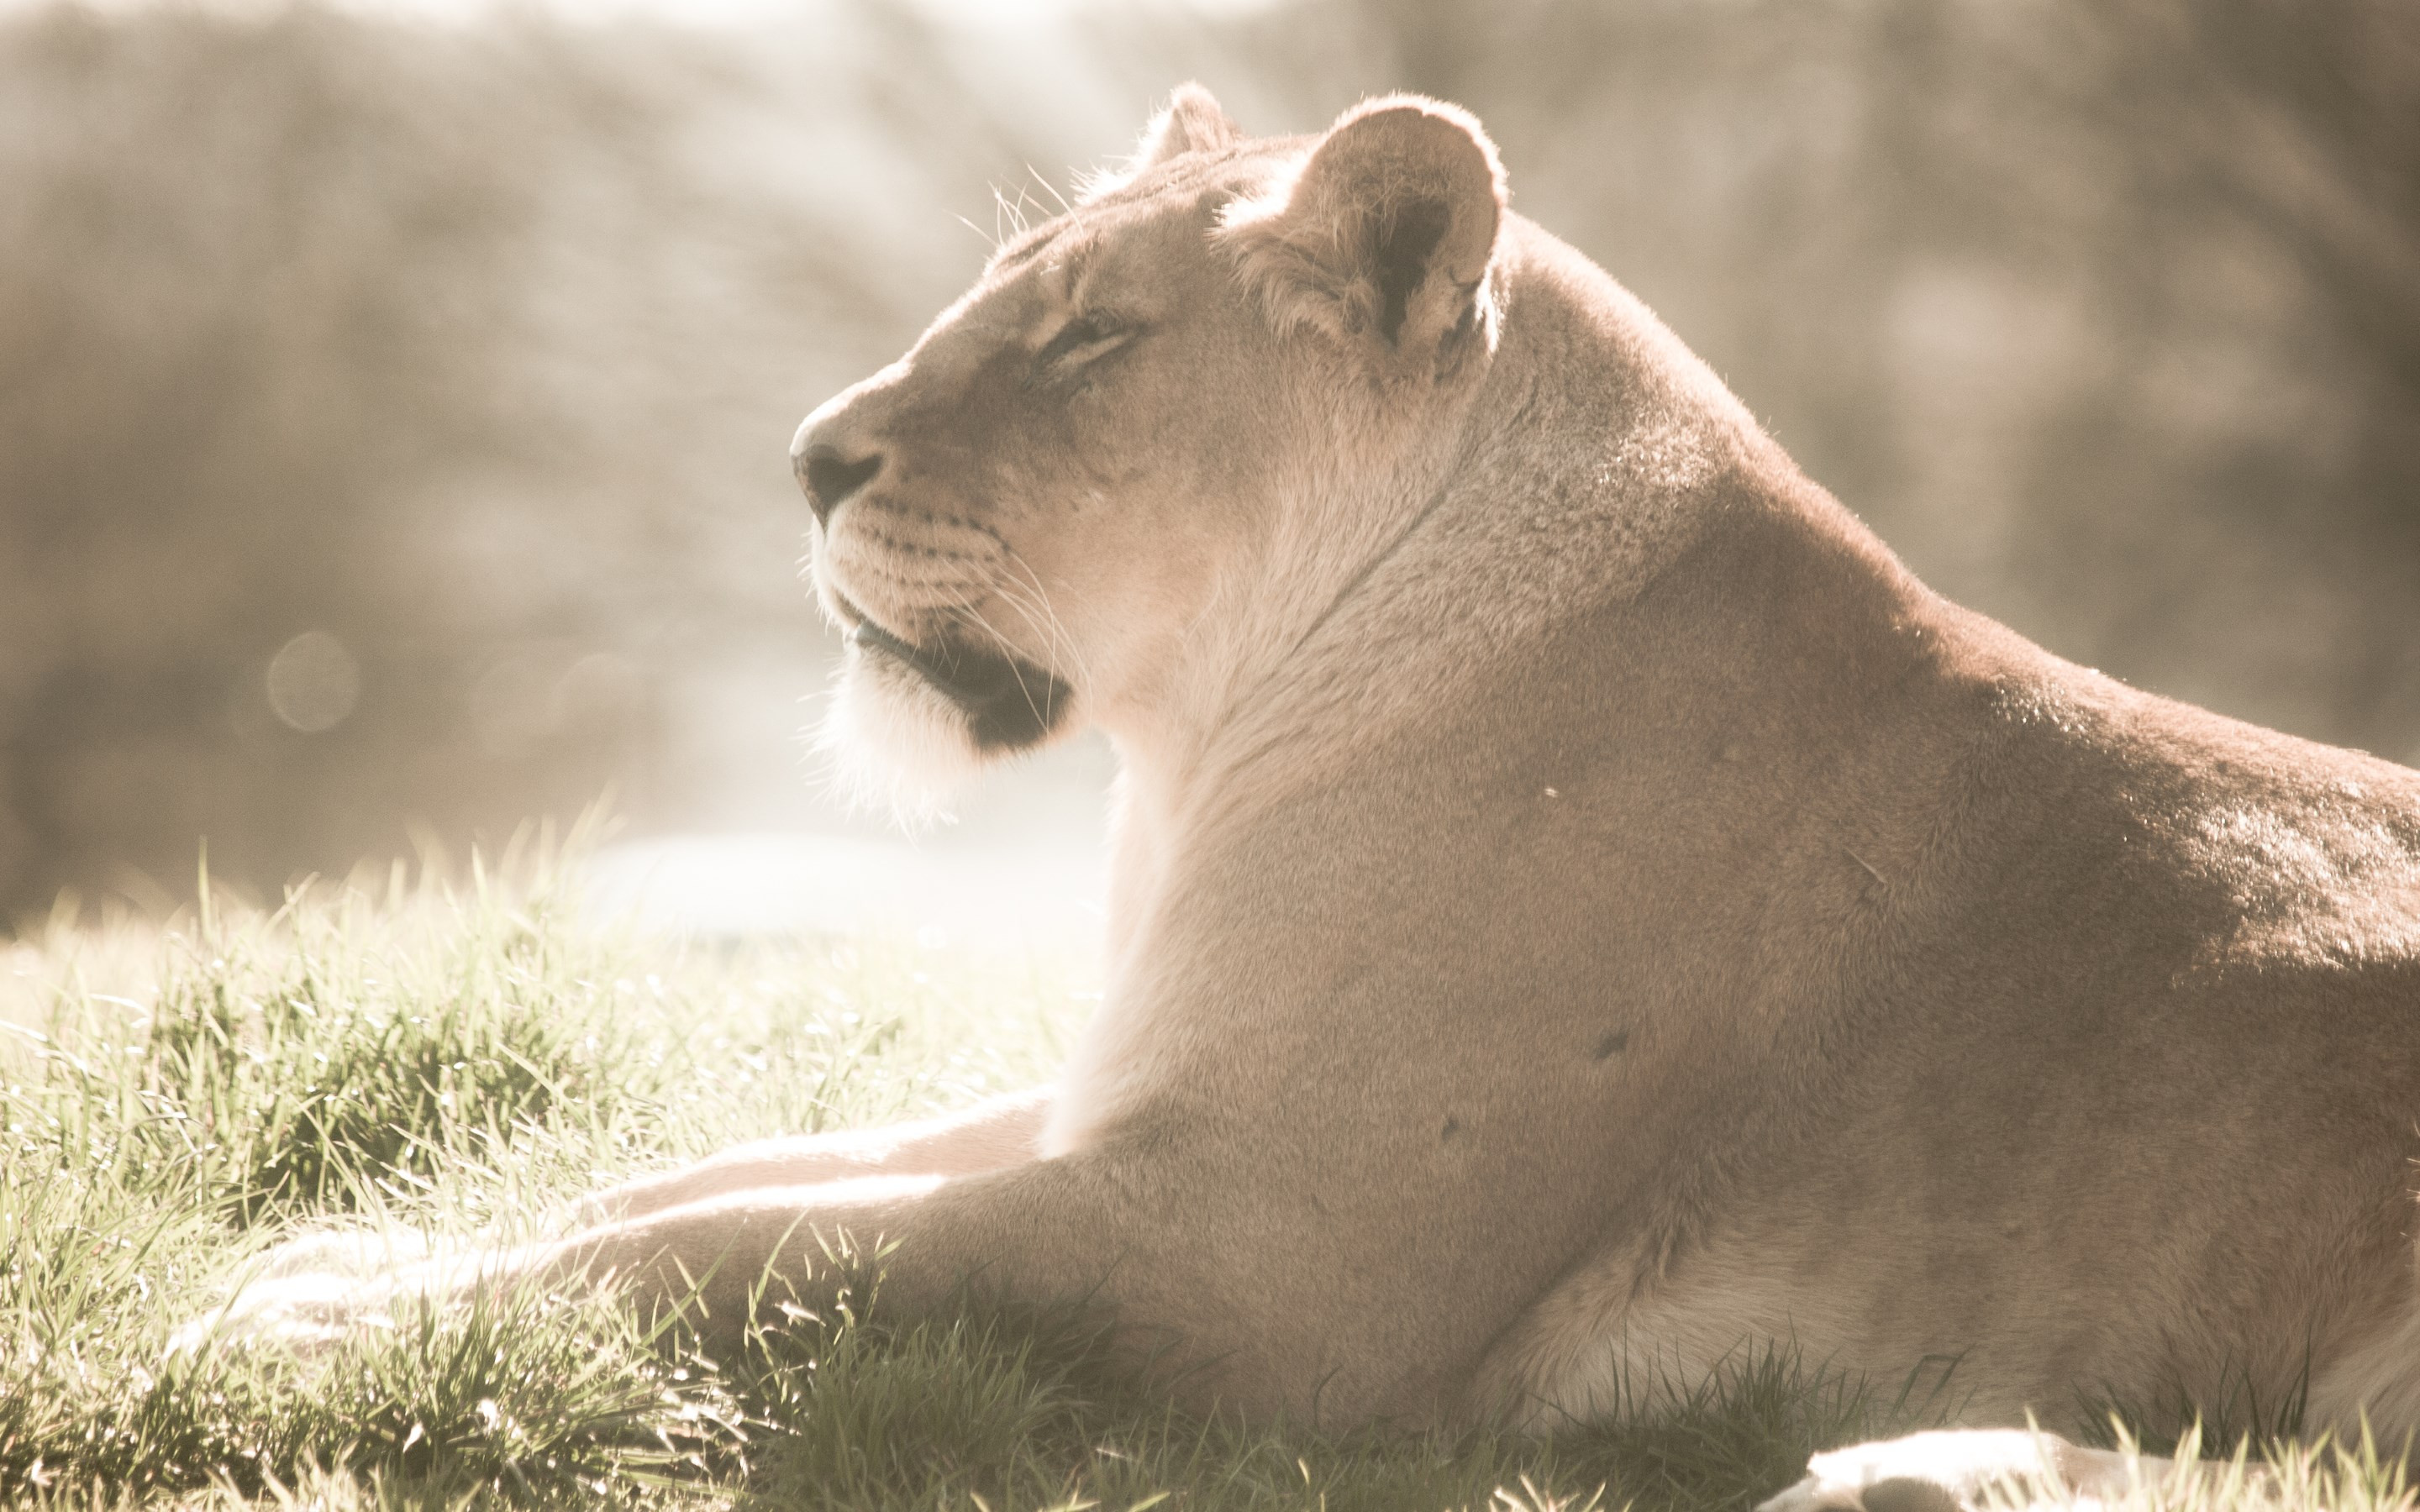 Lioness at Whipsnade Zoo wallpaper 2880x1800